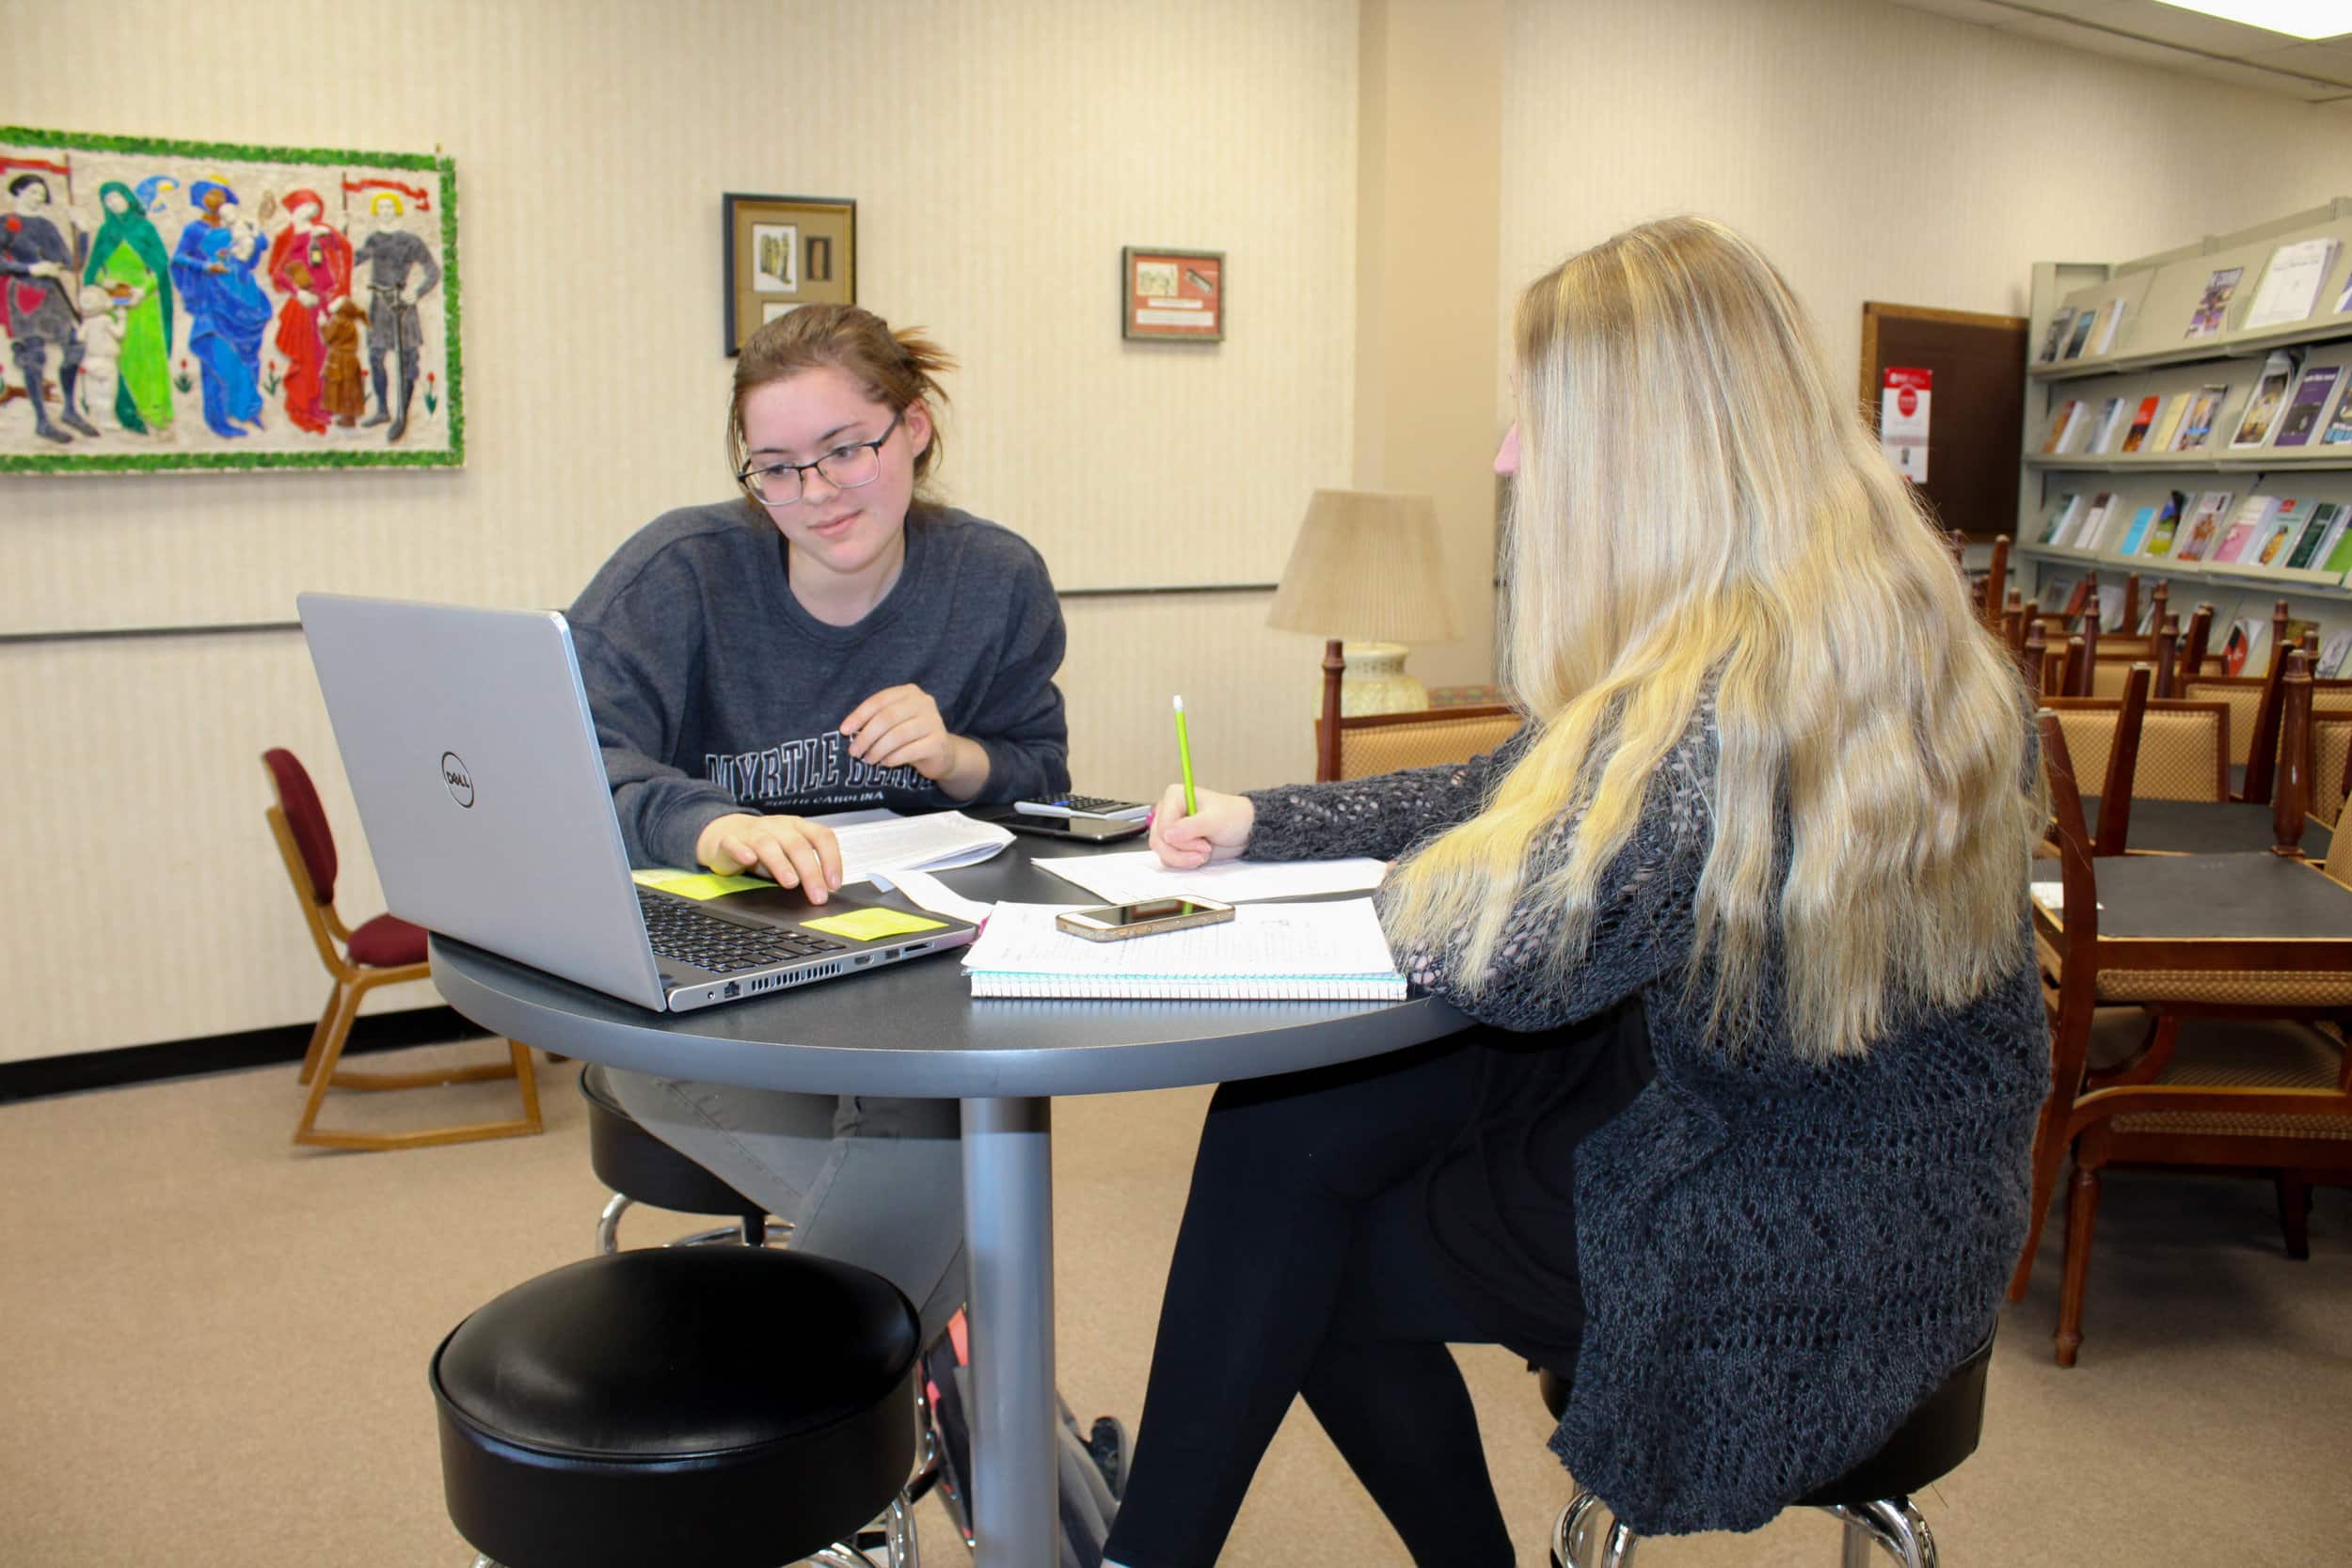 Fellow freshman biology majors Claire Smith and Katelin Hanna work on math work together.